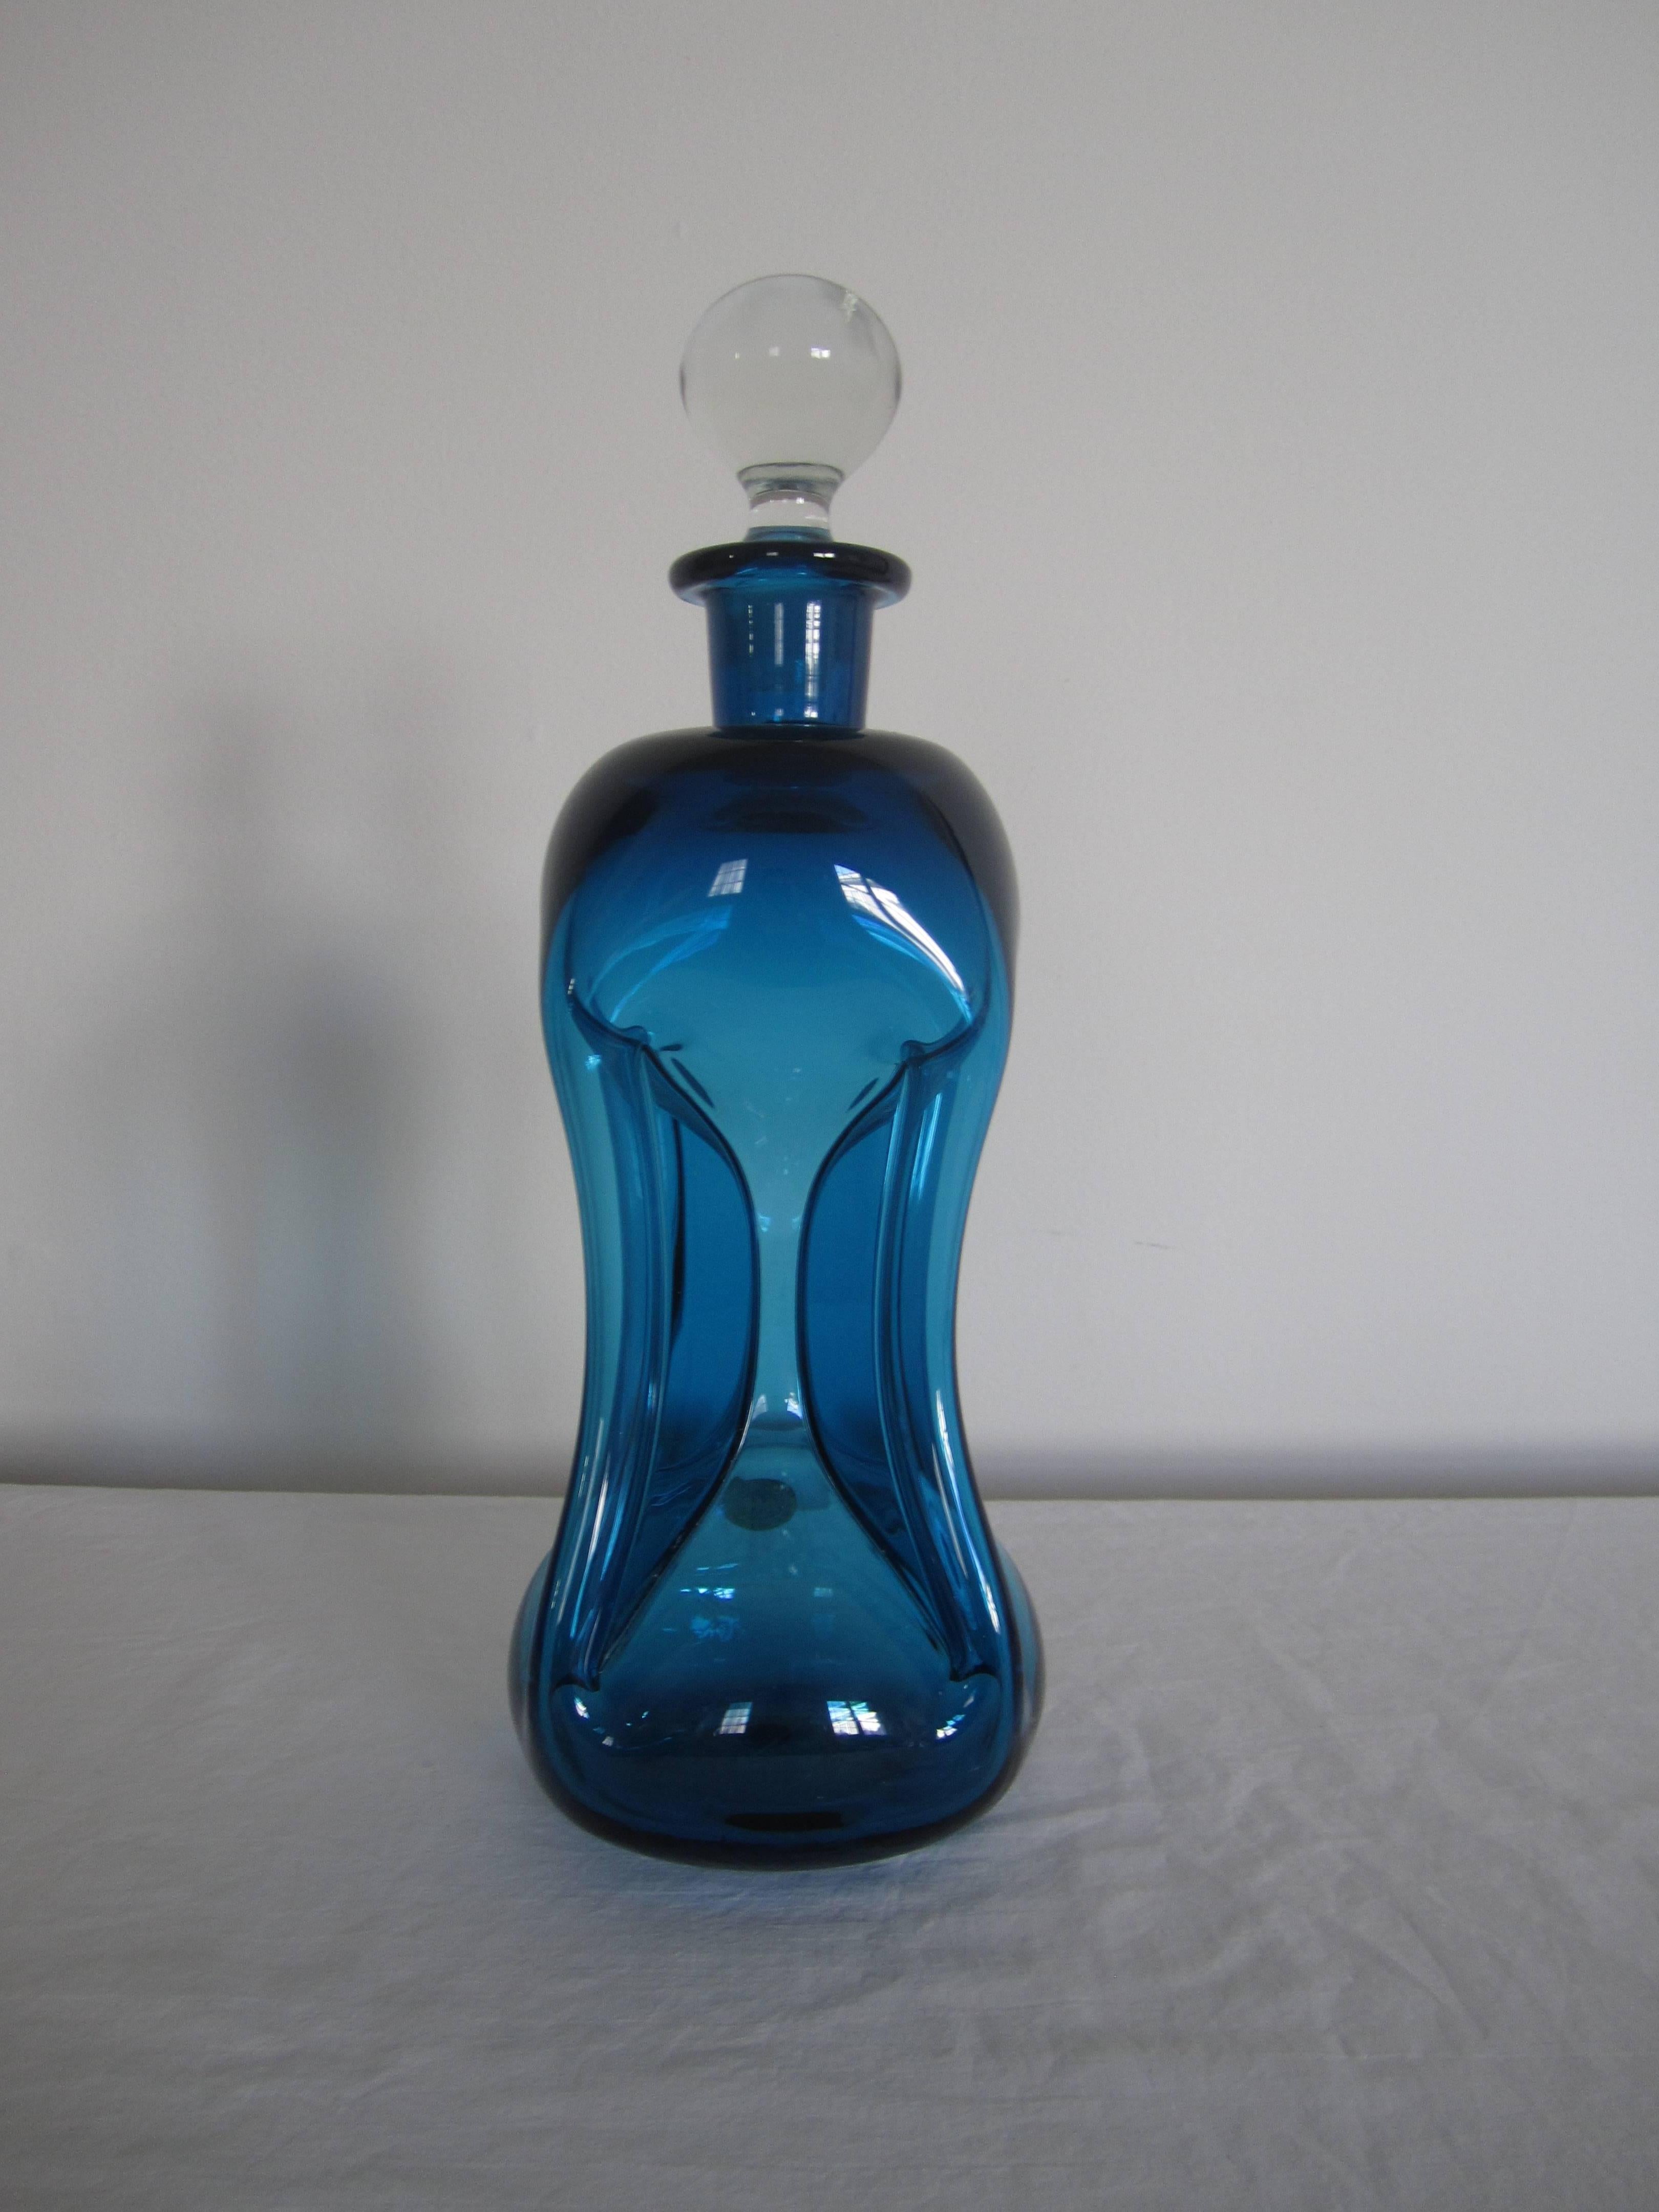 A vintage Scandinavian modern blue pinched art glass spirits bottle or decanter by HOLMEGAARD, Denmark. With makers mark label. Item available here online, and by request, can be made available at my showcase space in the Showplace Antique + Design